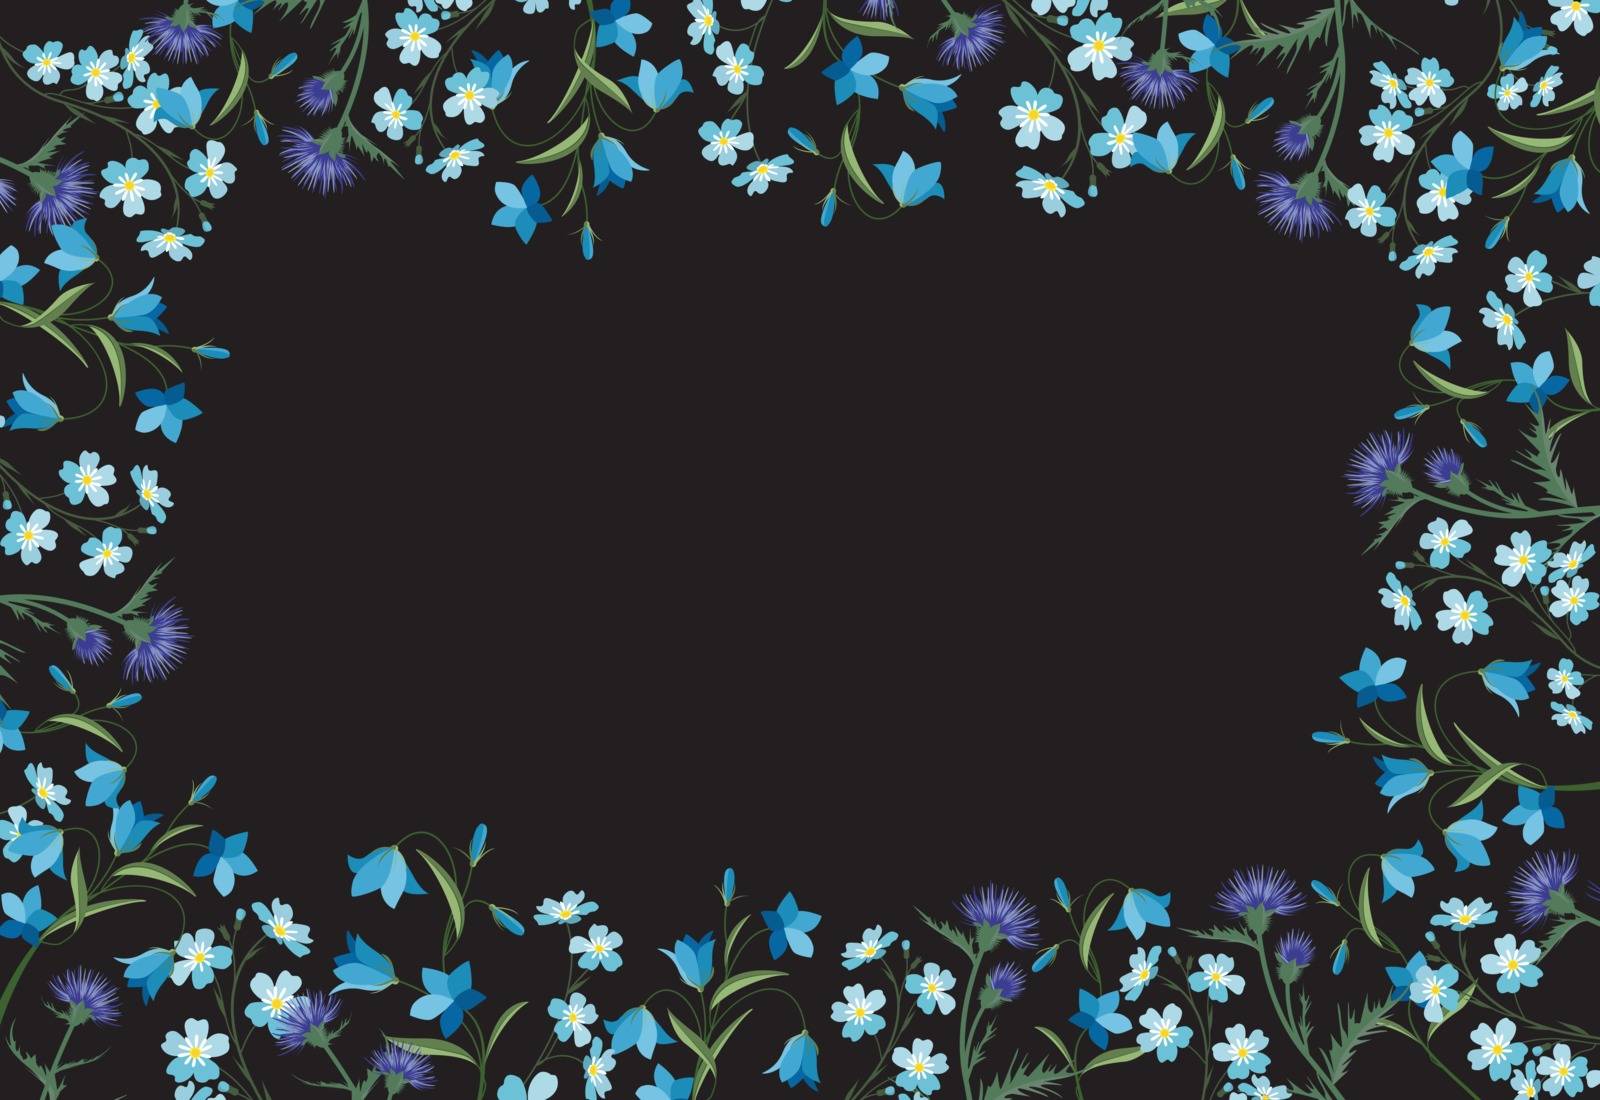 Vector illustration of colorful flowers. Frame floral decorations on a dark background. Nature background